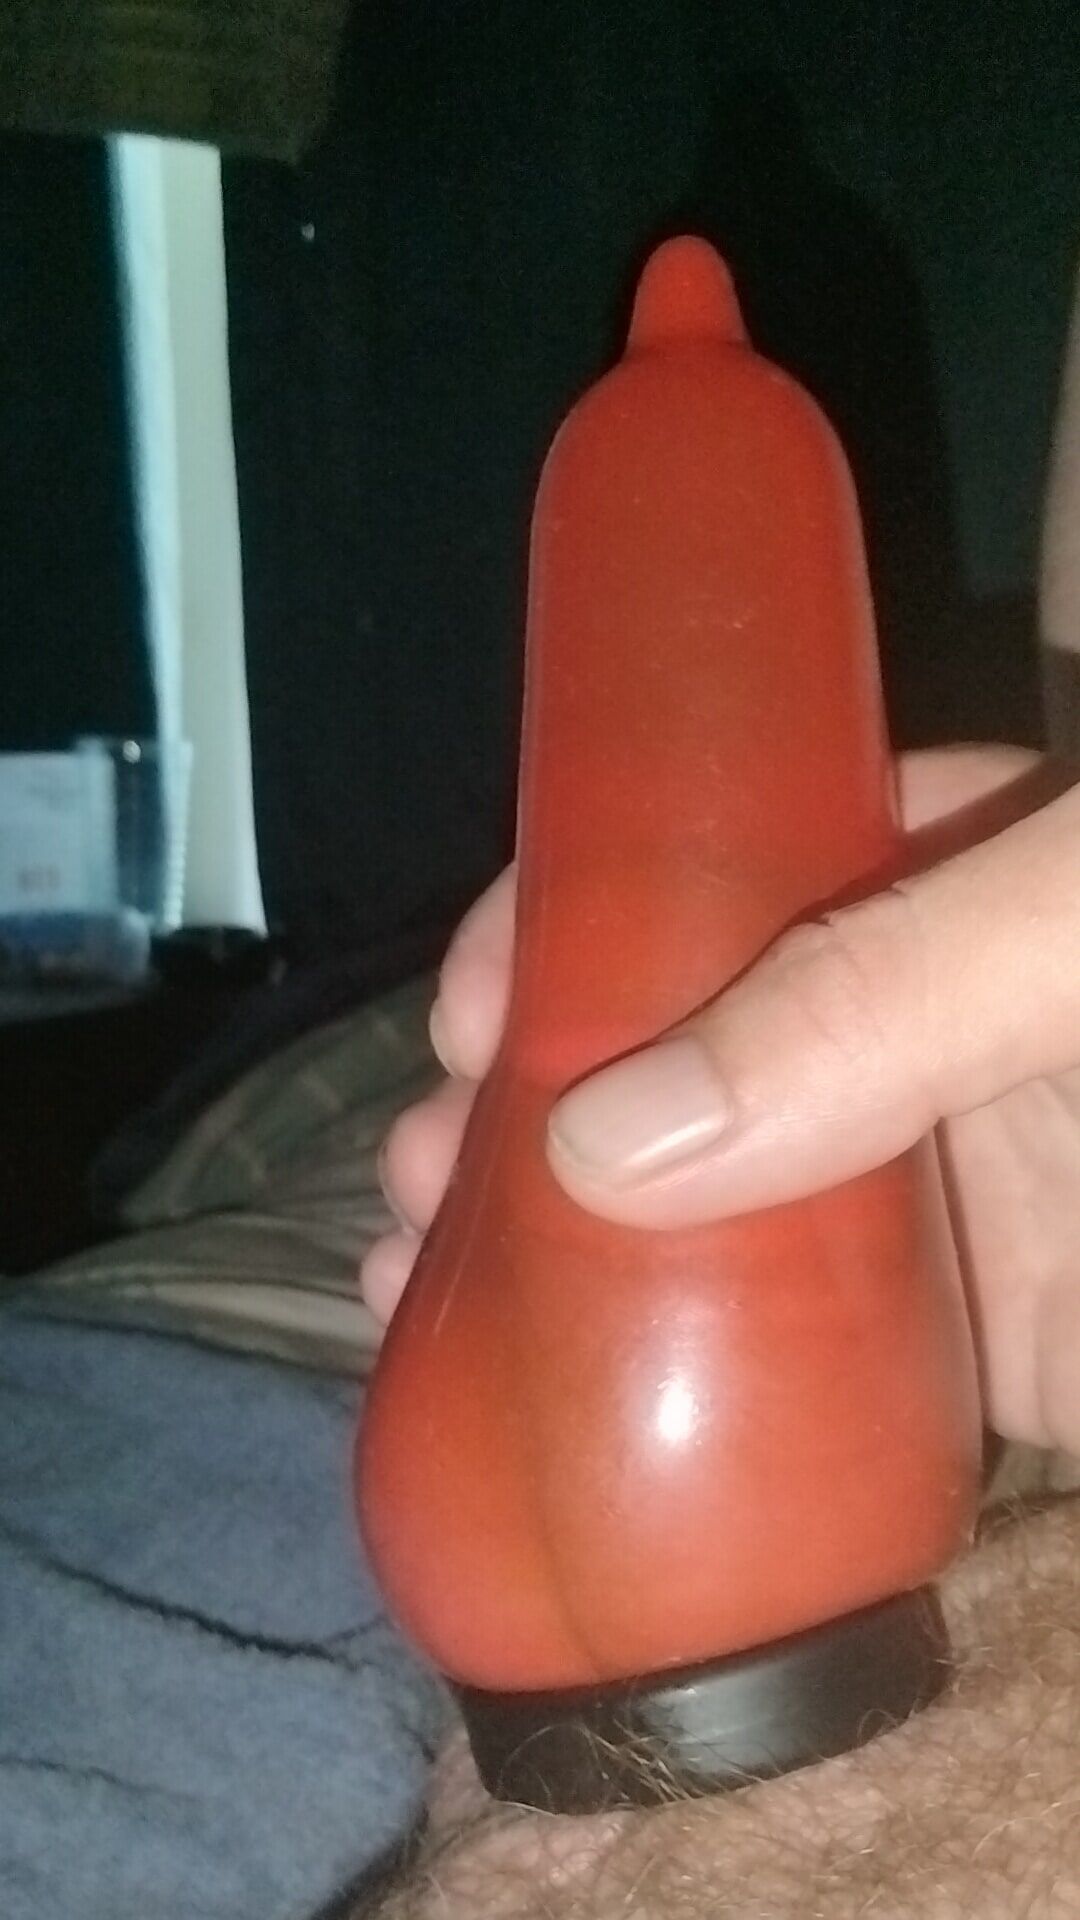 Just some random pics of my cock and my asshole  #2